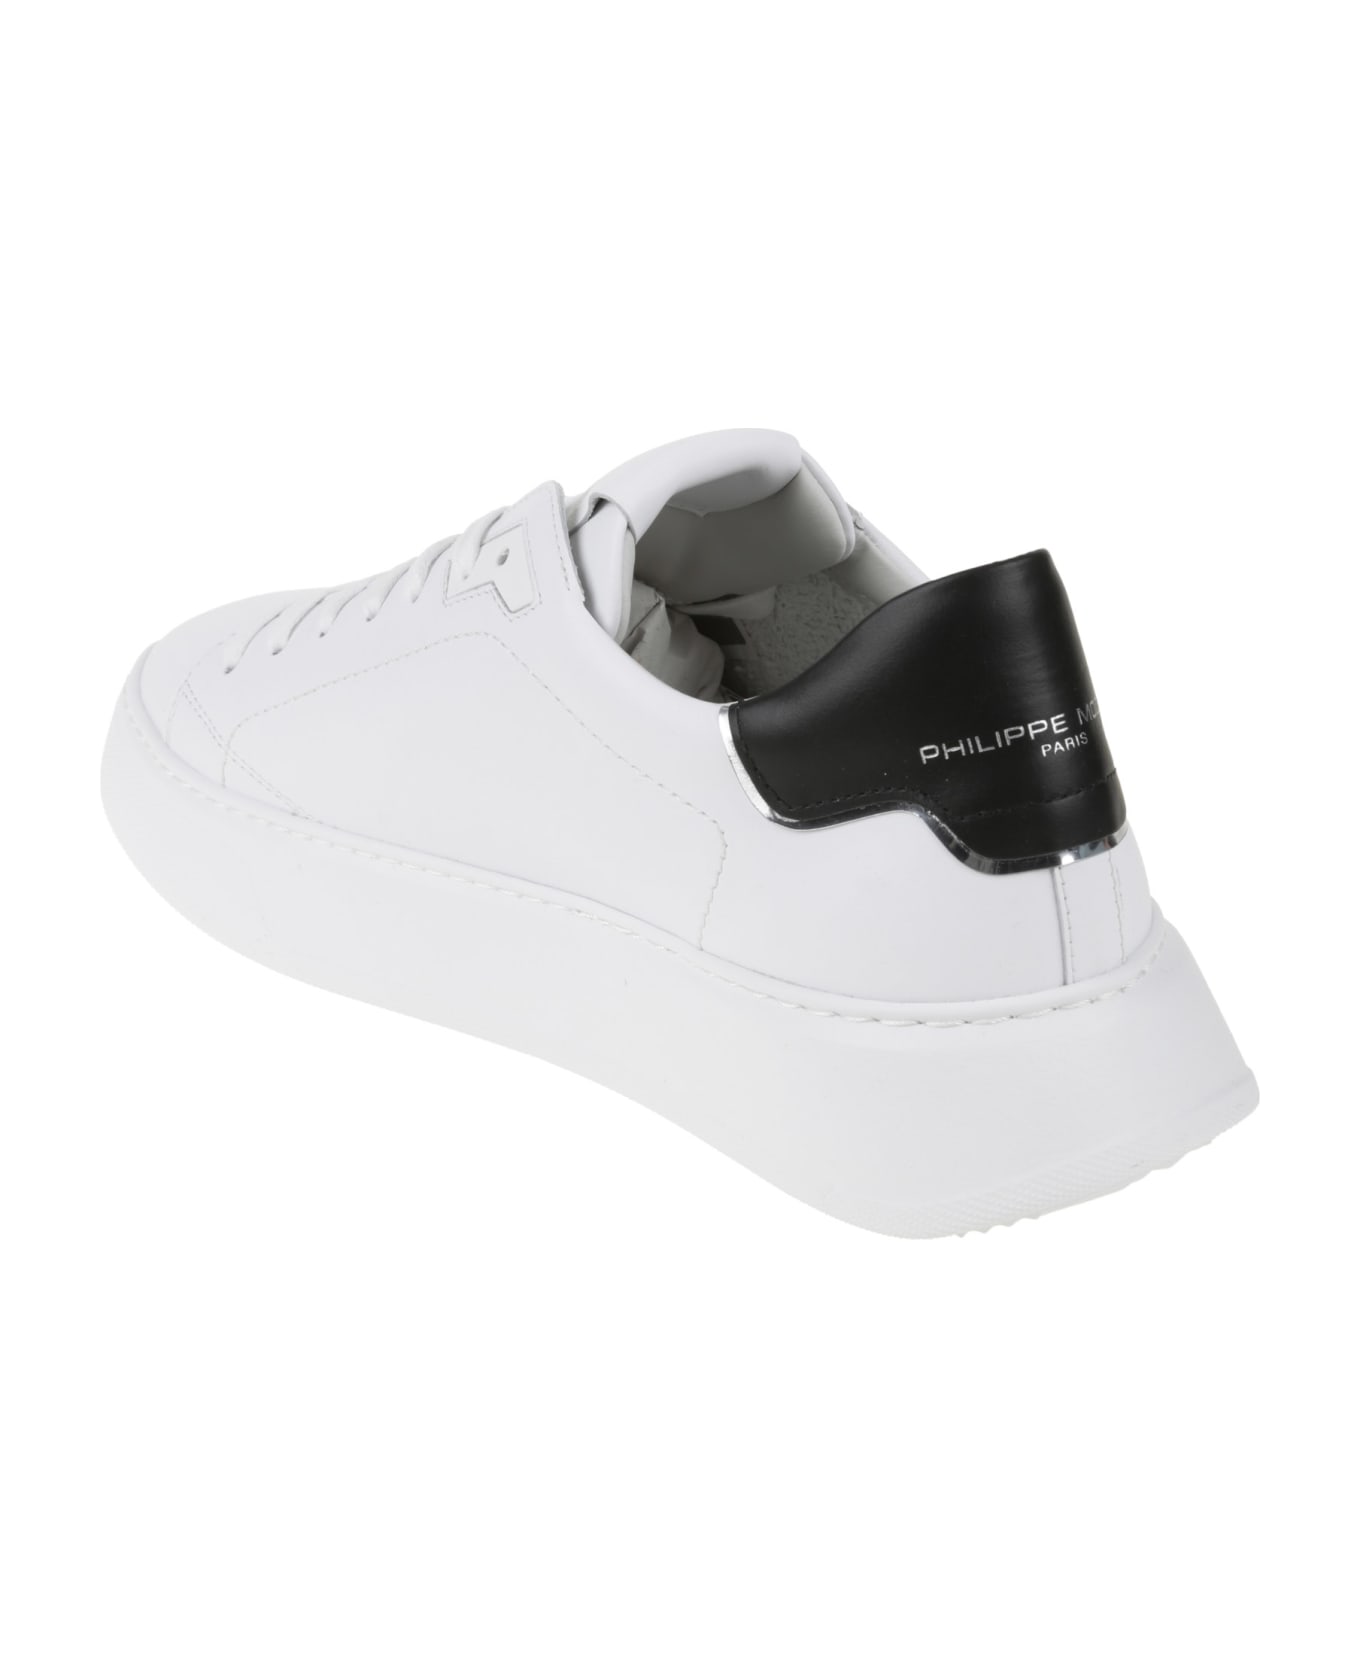 Philippe Model Temple Sneakers - White